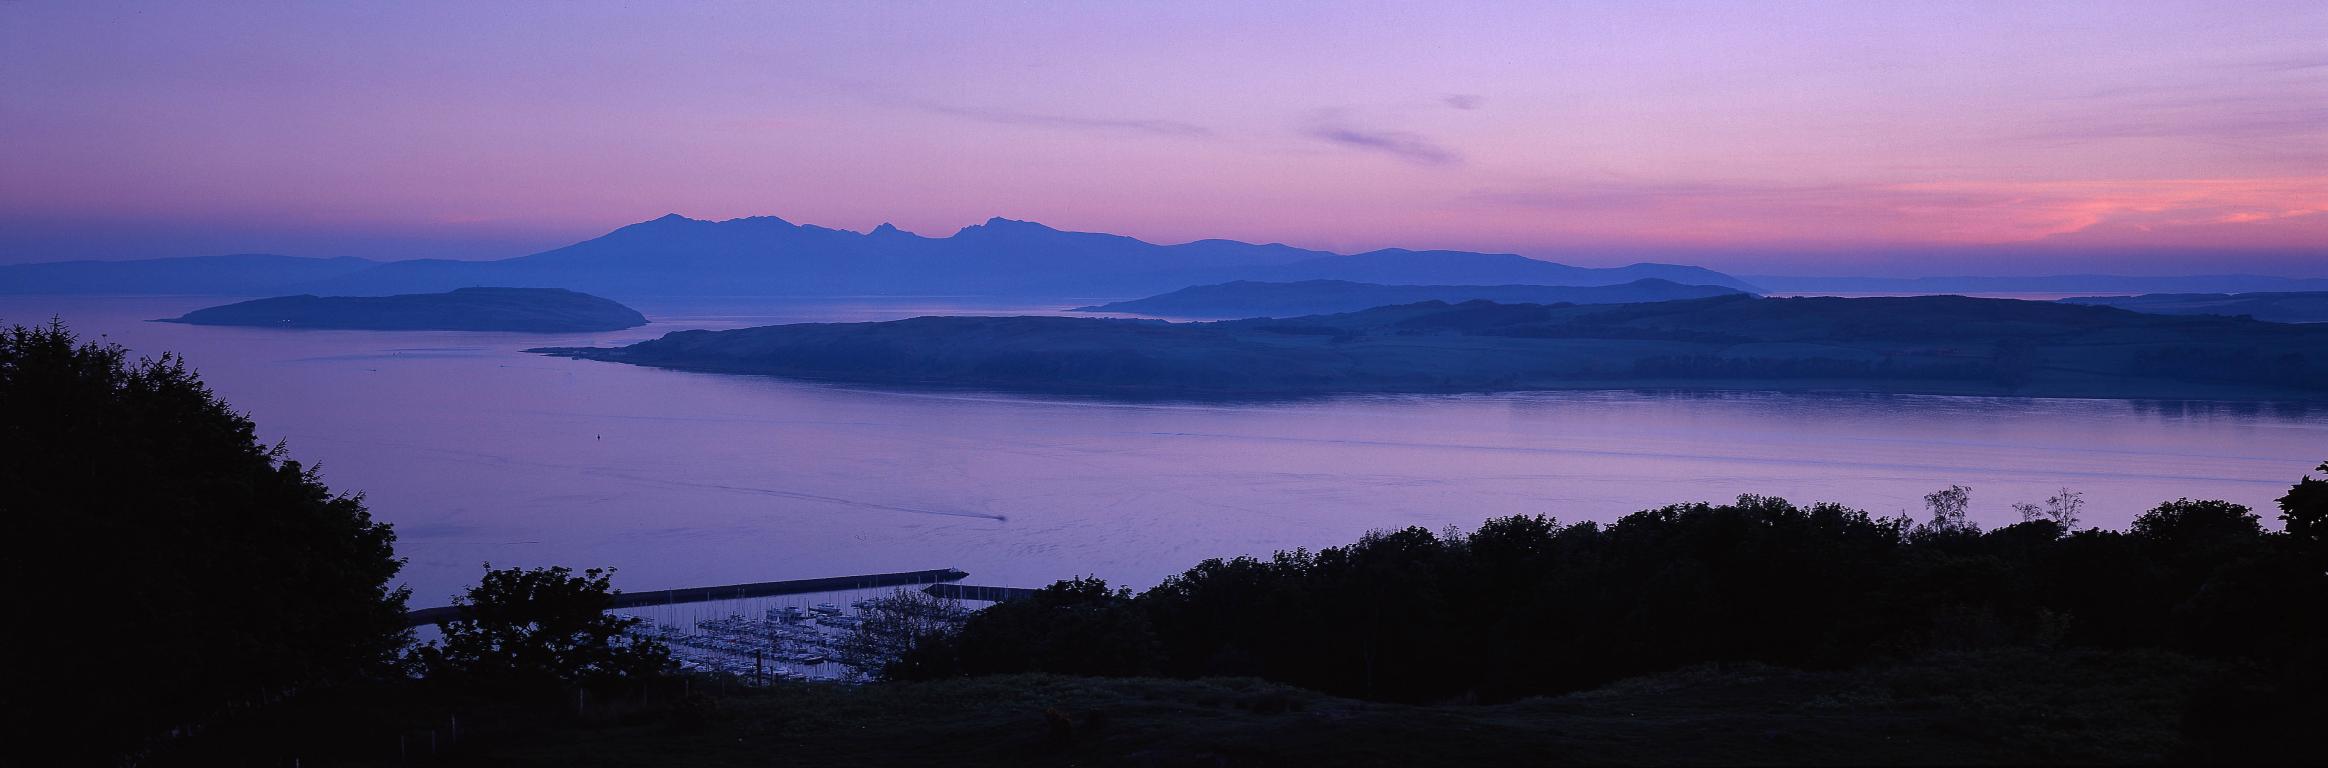 Islands of Little and Great Cumbrae (Credit: VisitScotland/ Paul Tomkins)